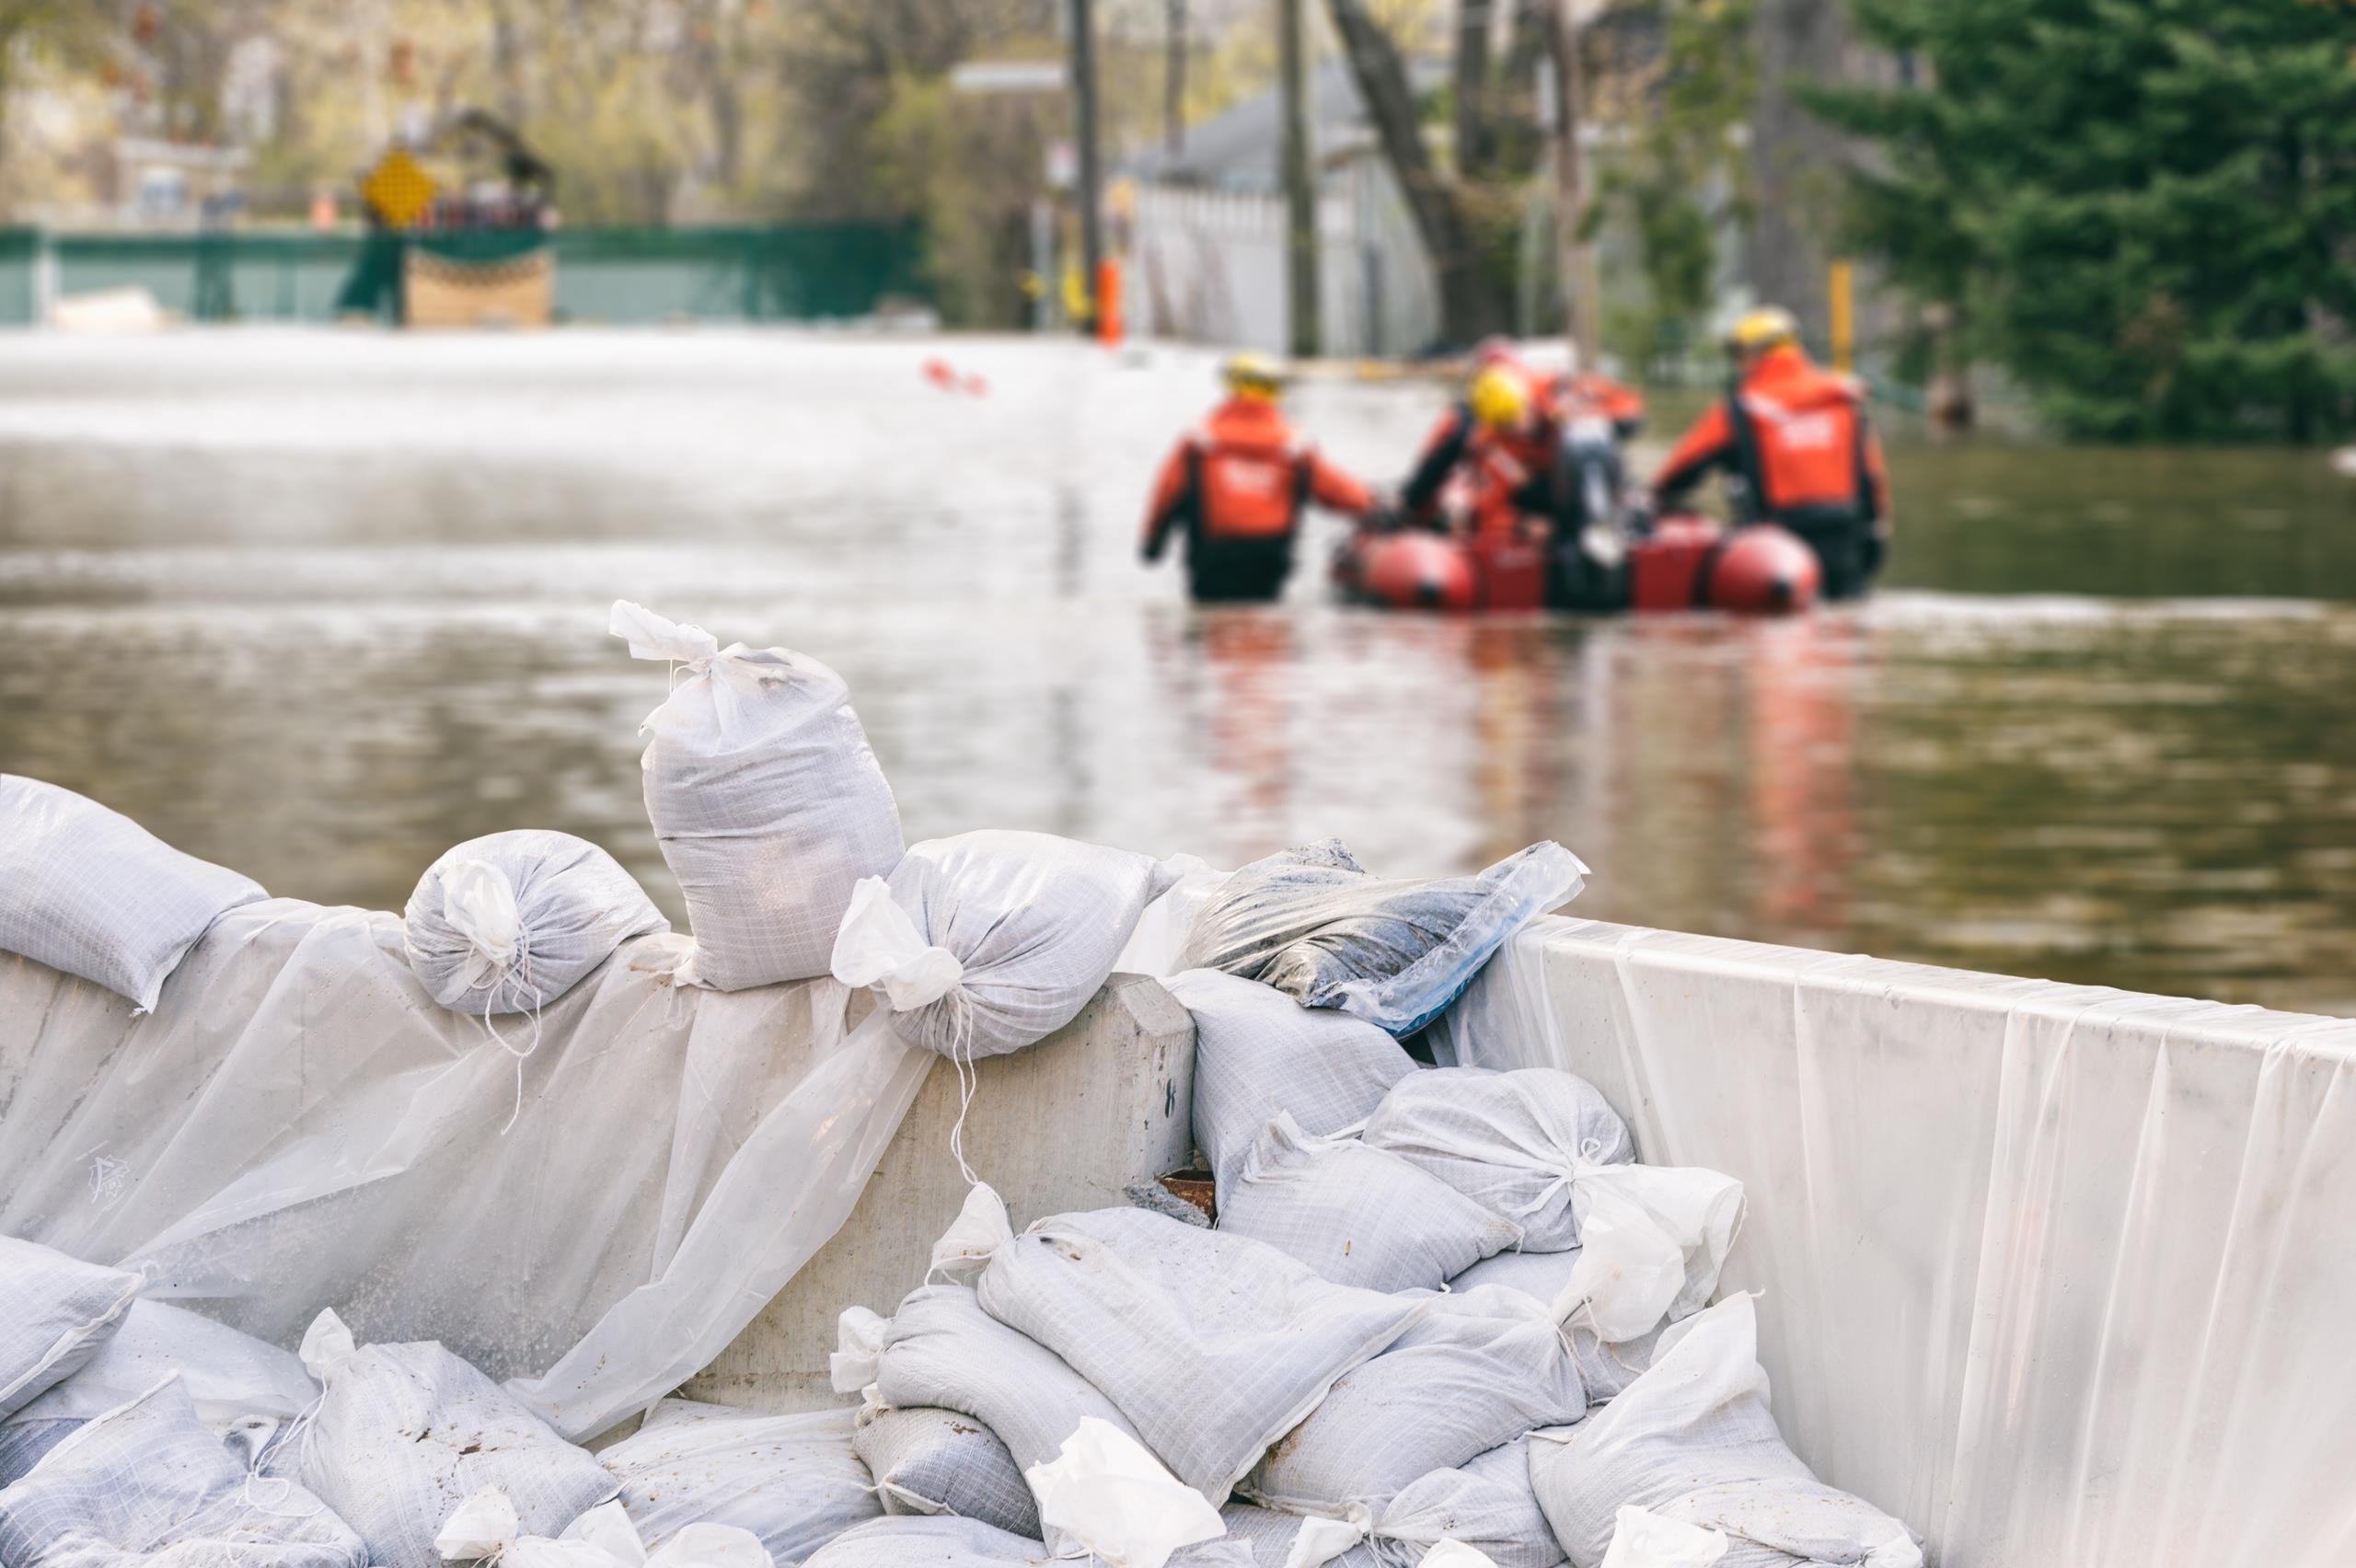 A sandbag wall setup to protect against the flood, with a flood rescue team in the background